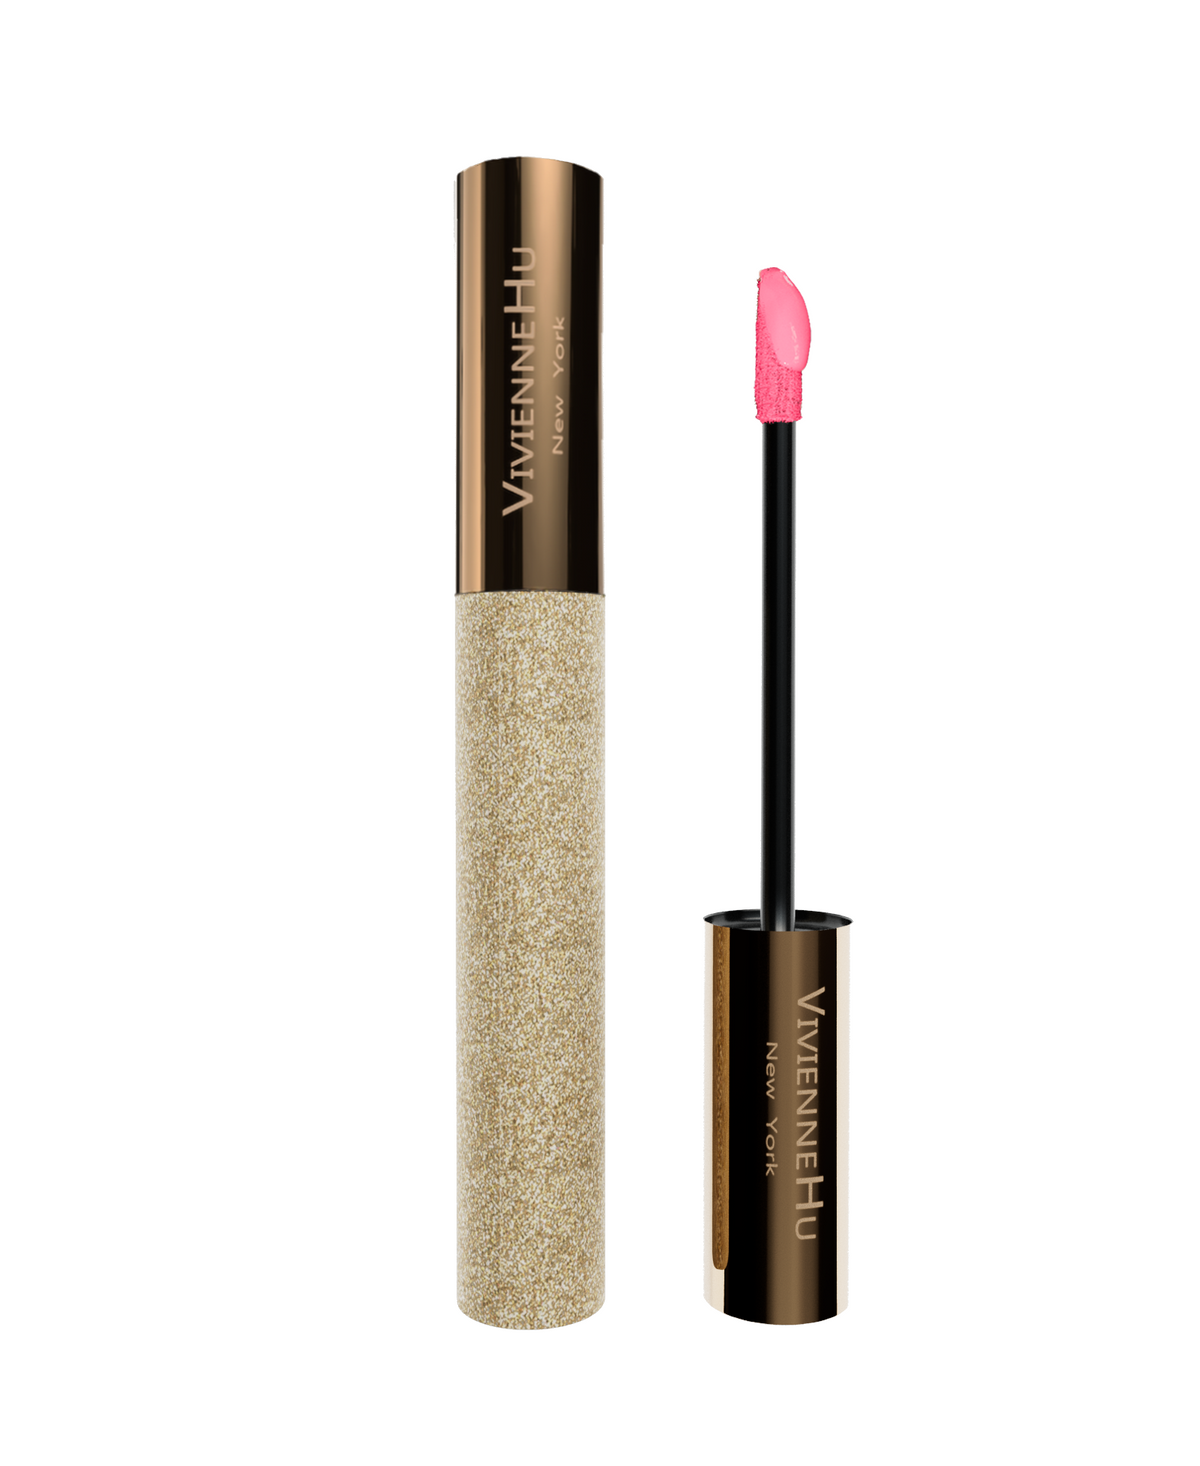 GOLDSAND LONG-TERM HYDRATION EFFECT LIP PLUMPING GLOSS – WITH HYALURONIC ACID|806 CORALPINK